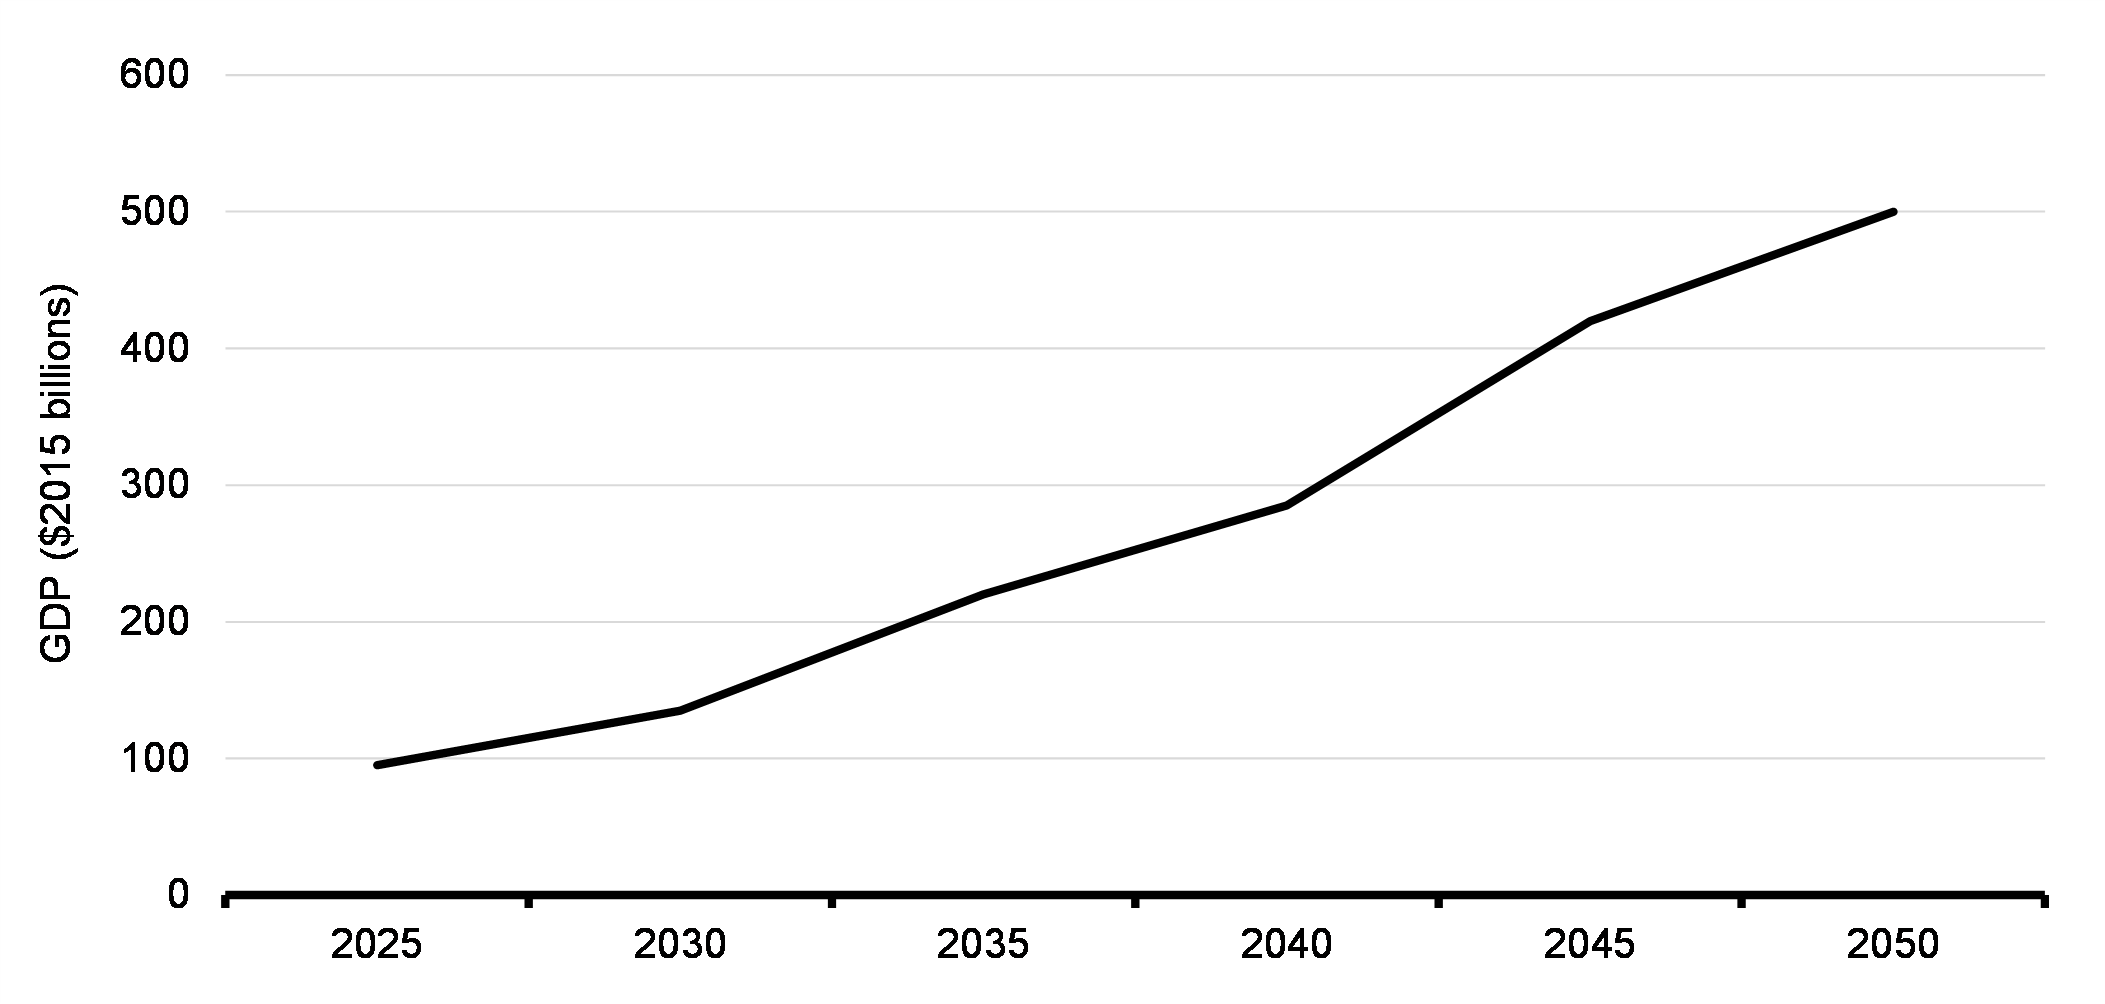 Chart 3.1: Clean Energy GDP Growth, 2025 to 2050